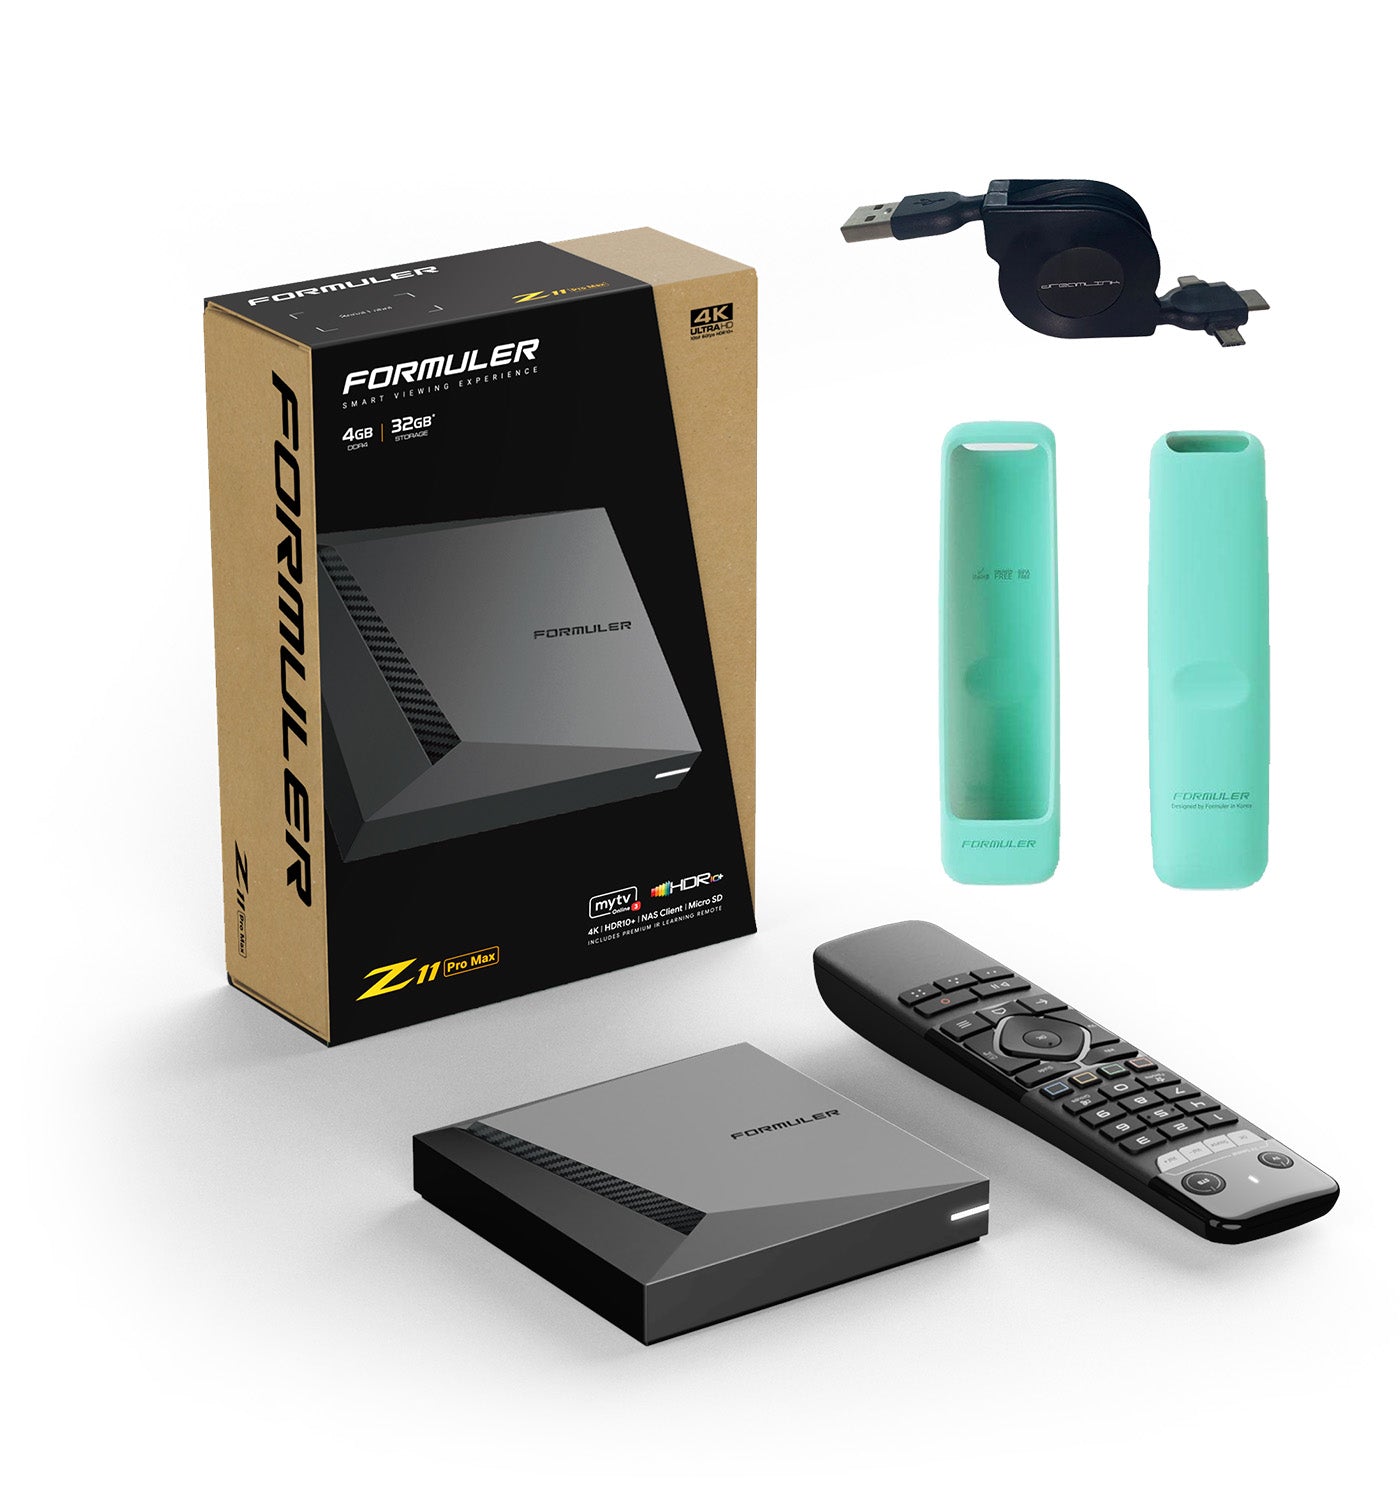 Formuler Z11 Pro Max + FREE ACCESSORIES: 1x TURQUOISE remote cover + 1x USB Retractable Turquoise Cable